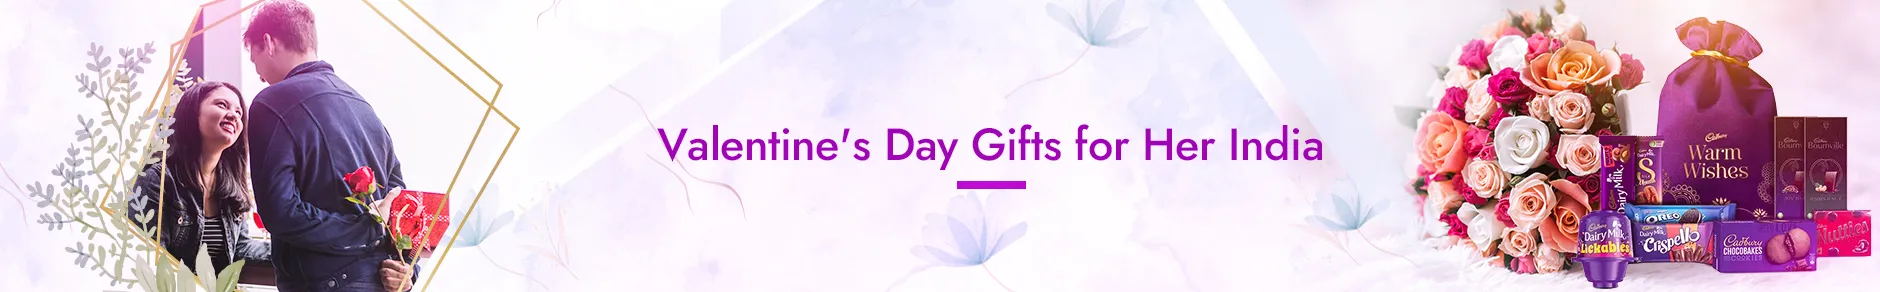 Valentine's Day Gifts for Her India